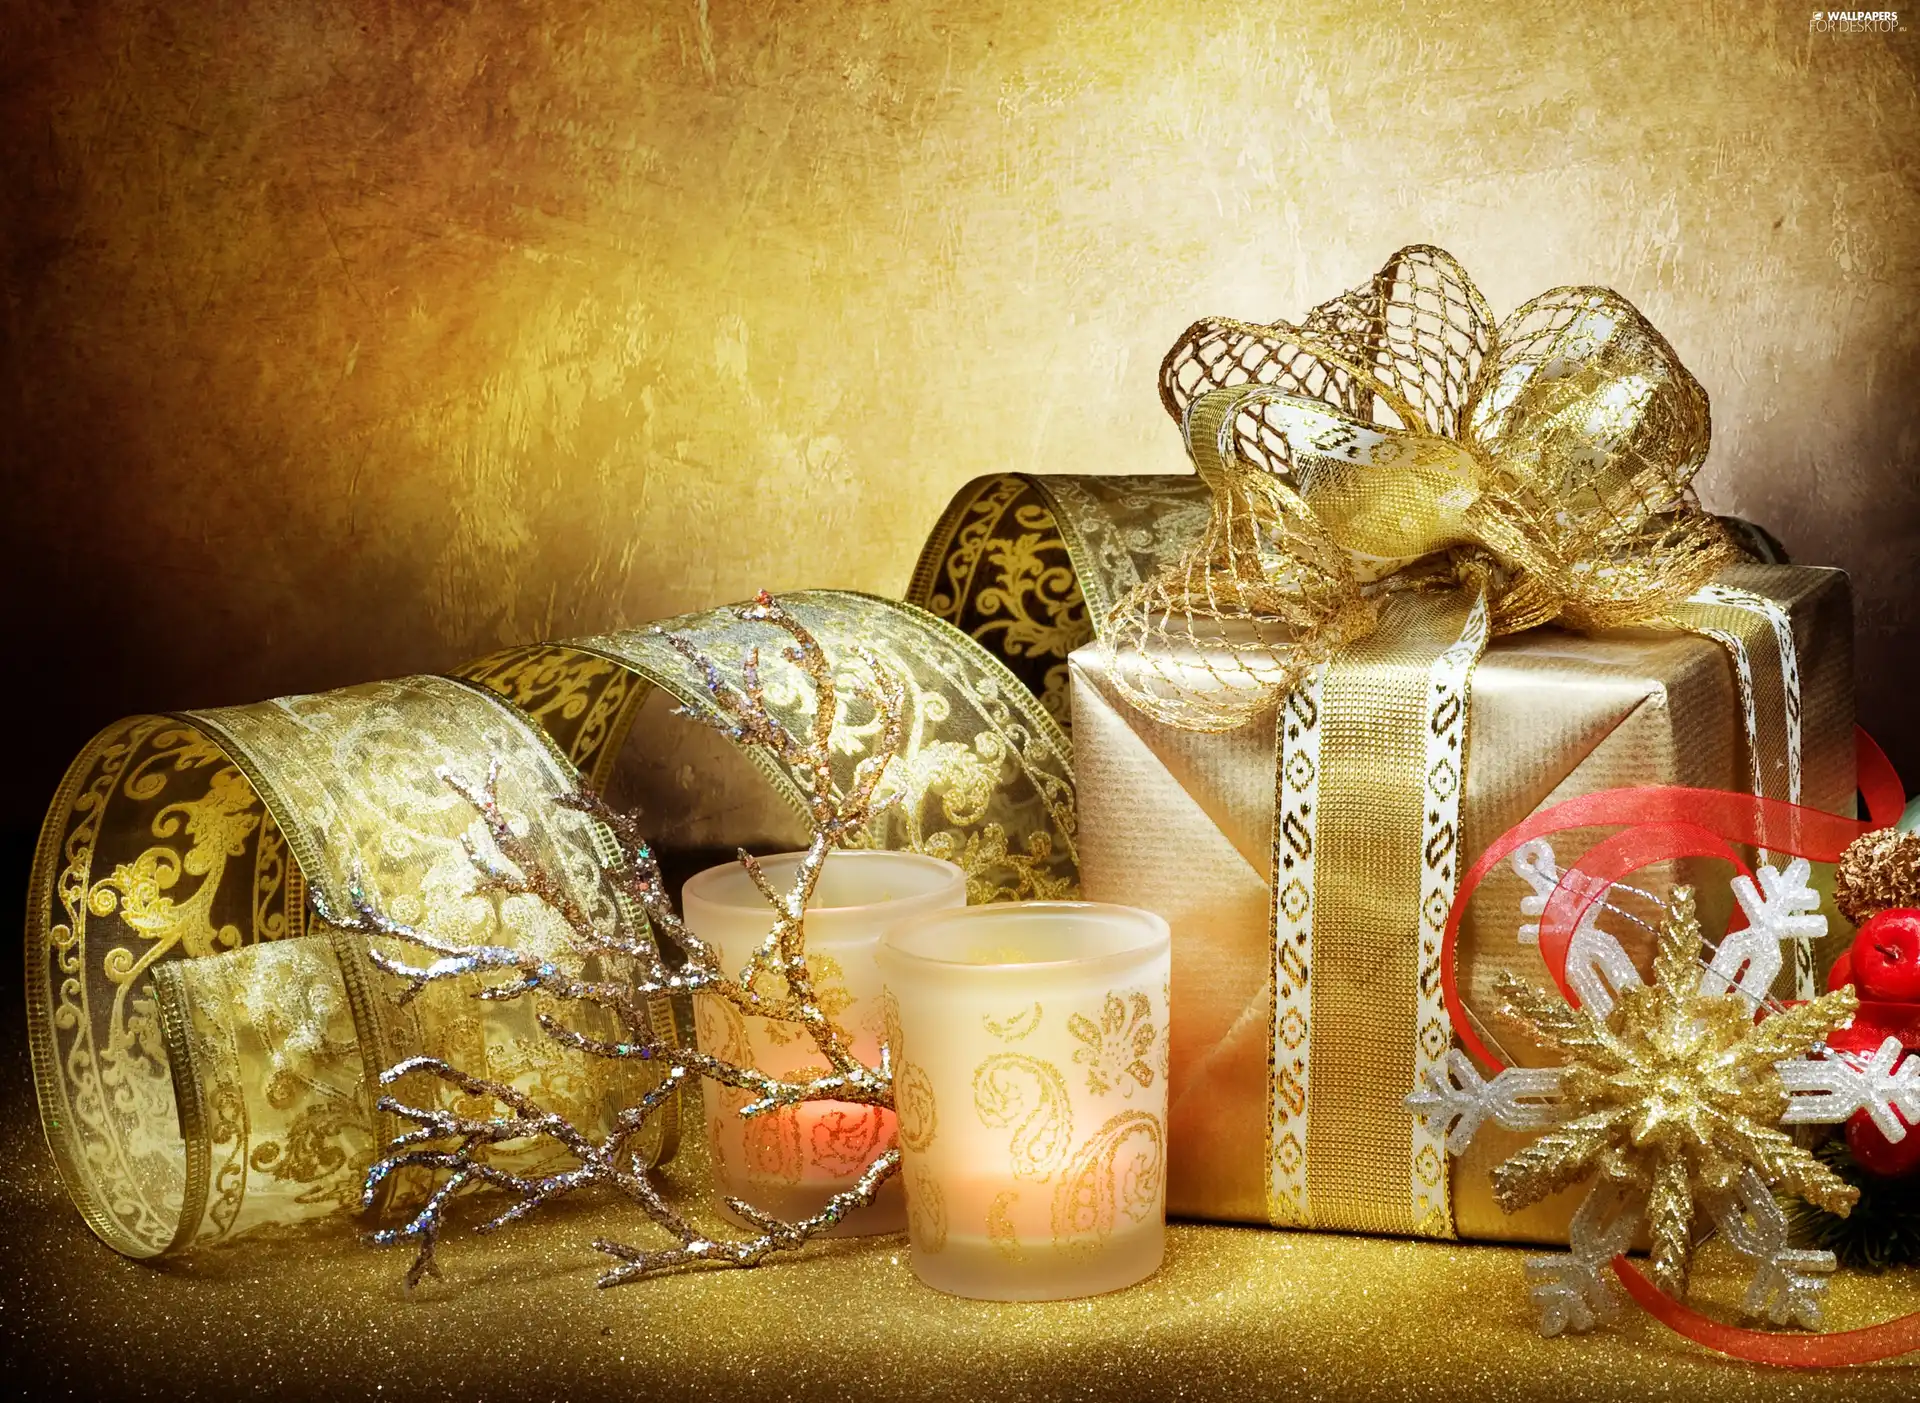 decoration, Candles, gifts, Christmas